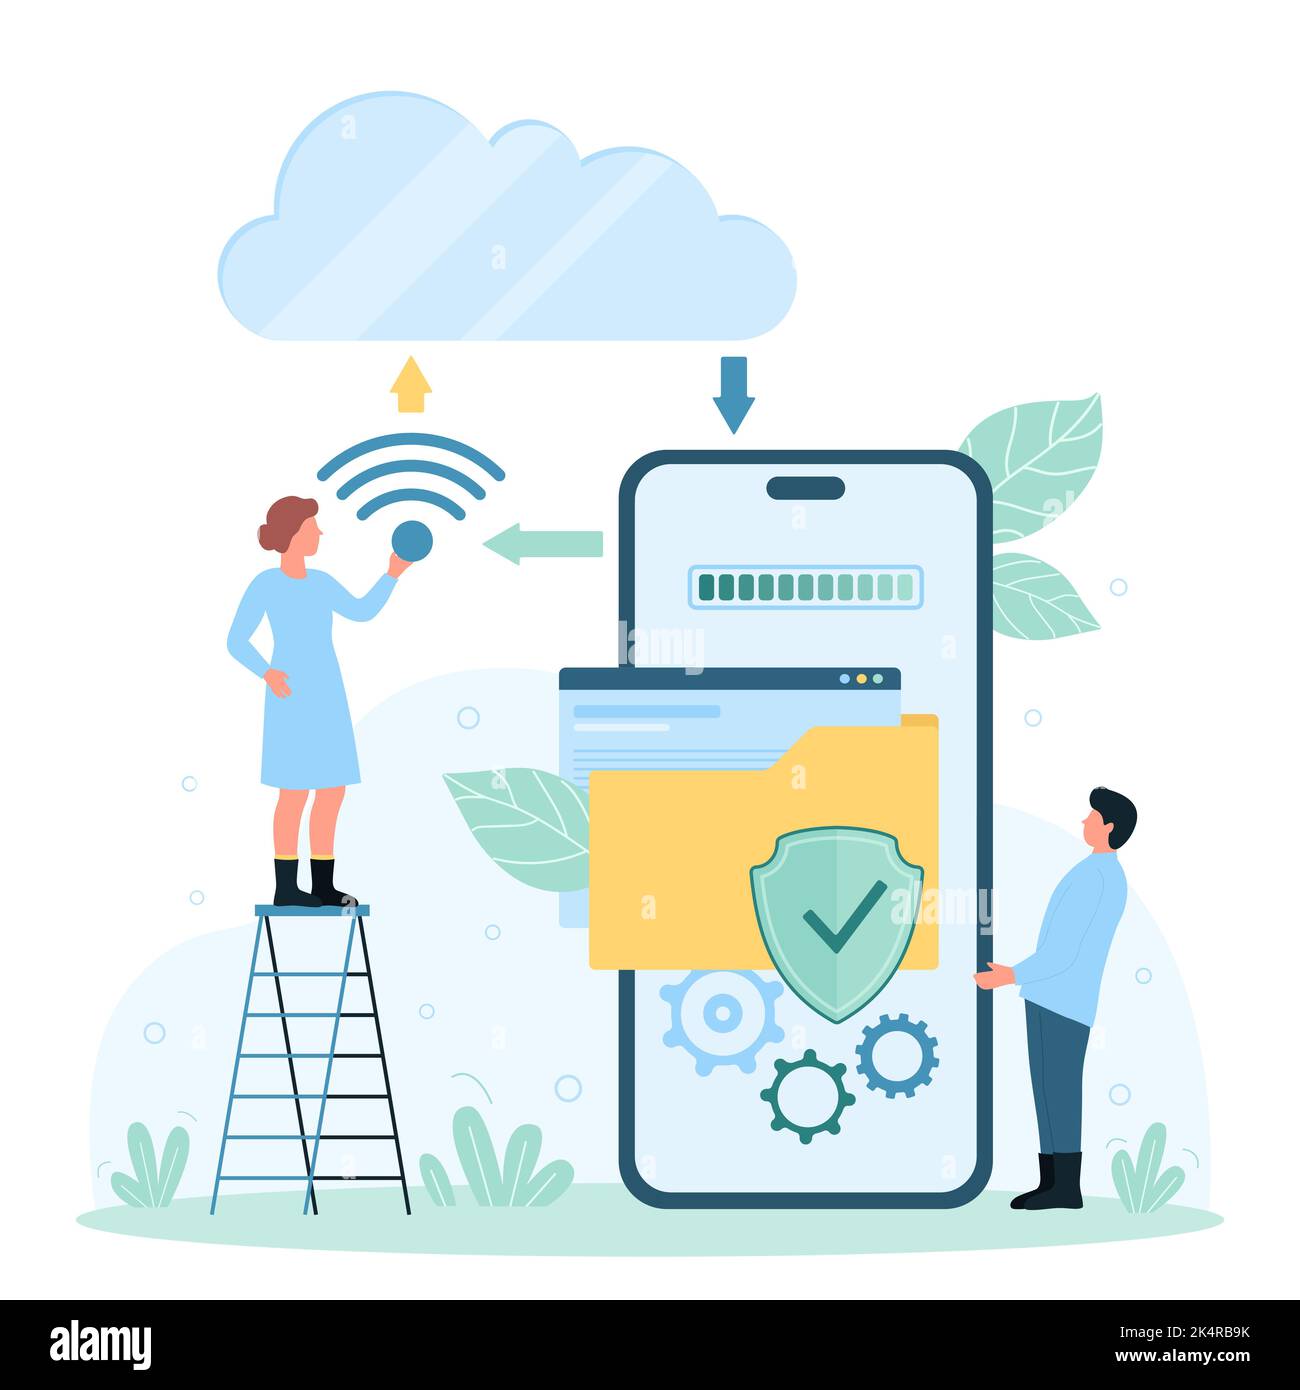 Cloud data storage service for mobile phones, networking infrastructure and communication vector illustration. Cartoon tiny people holding wireless sign, download files and documents in smartphone Stock Vector